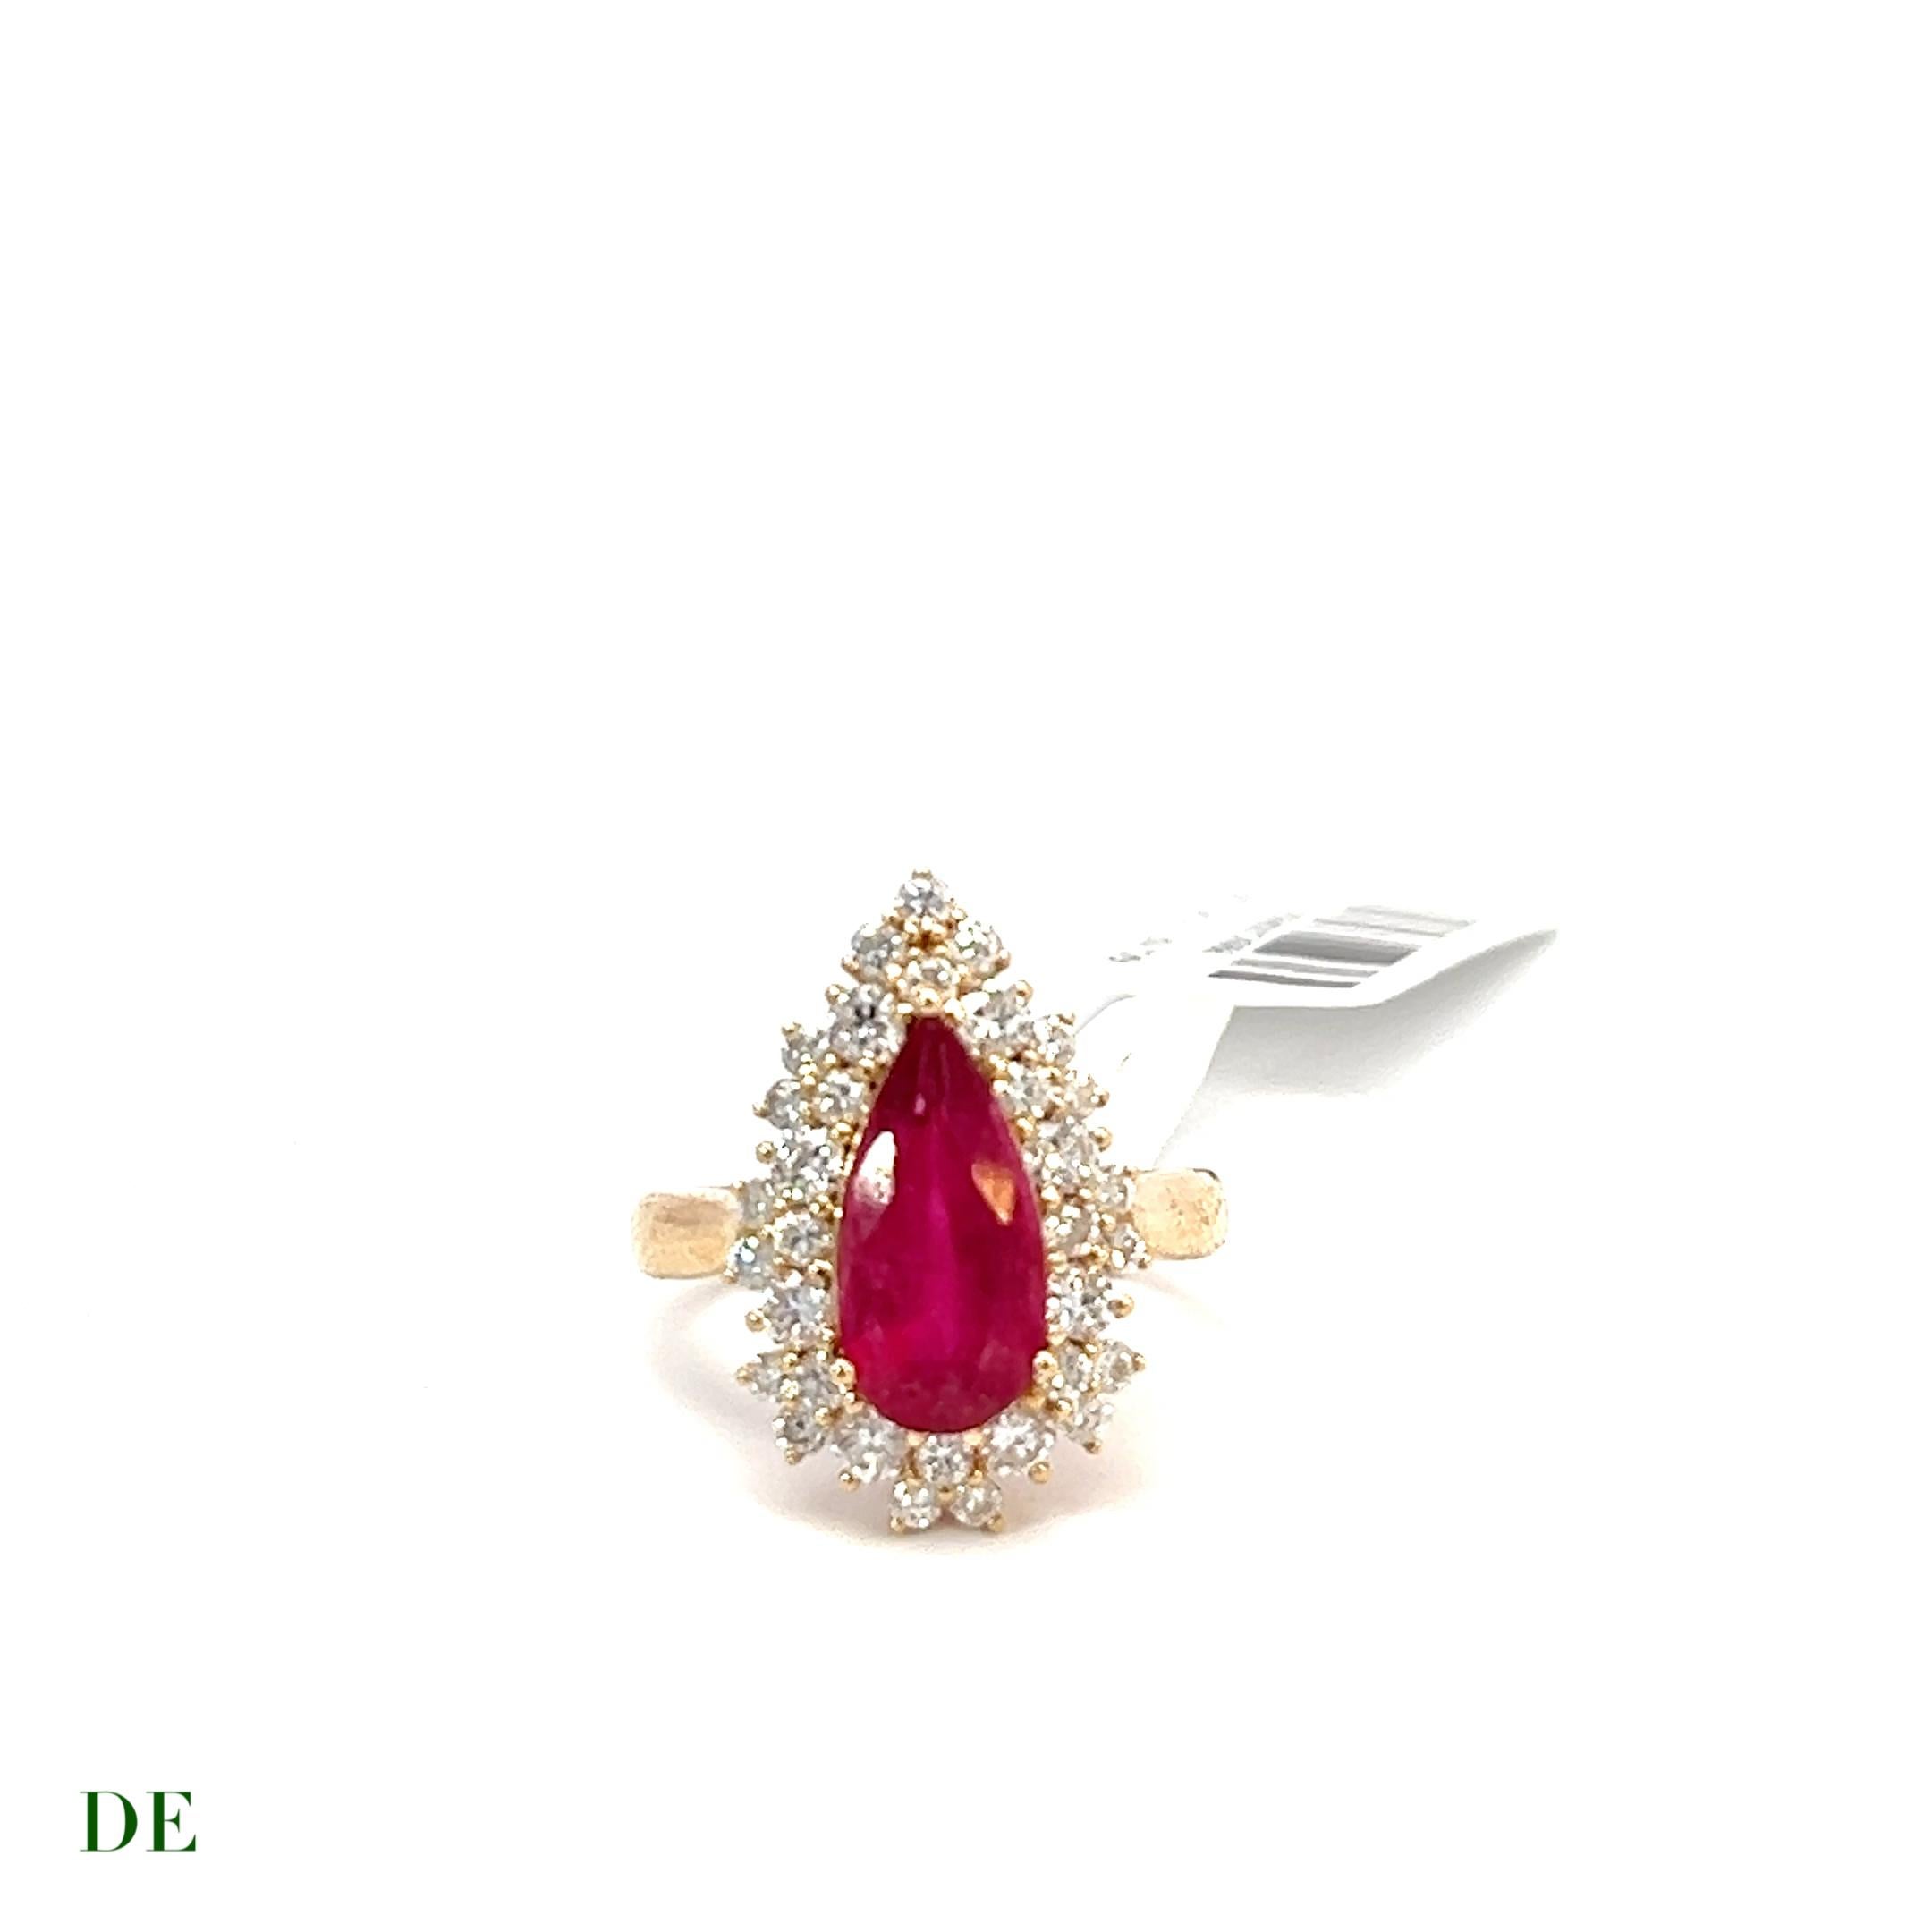 Rare 14k 2.69ct Pear Vivid Red Rubellite with 1.22ct Statement Diamond Ring

Introducing a true masterpiece of elegance and sophistication: the Rare 14k 2.69ct Pear Vivid Red Rubellite with 1.22ct Statement Diamond Ring. This exquisite piece